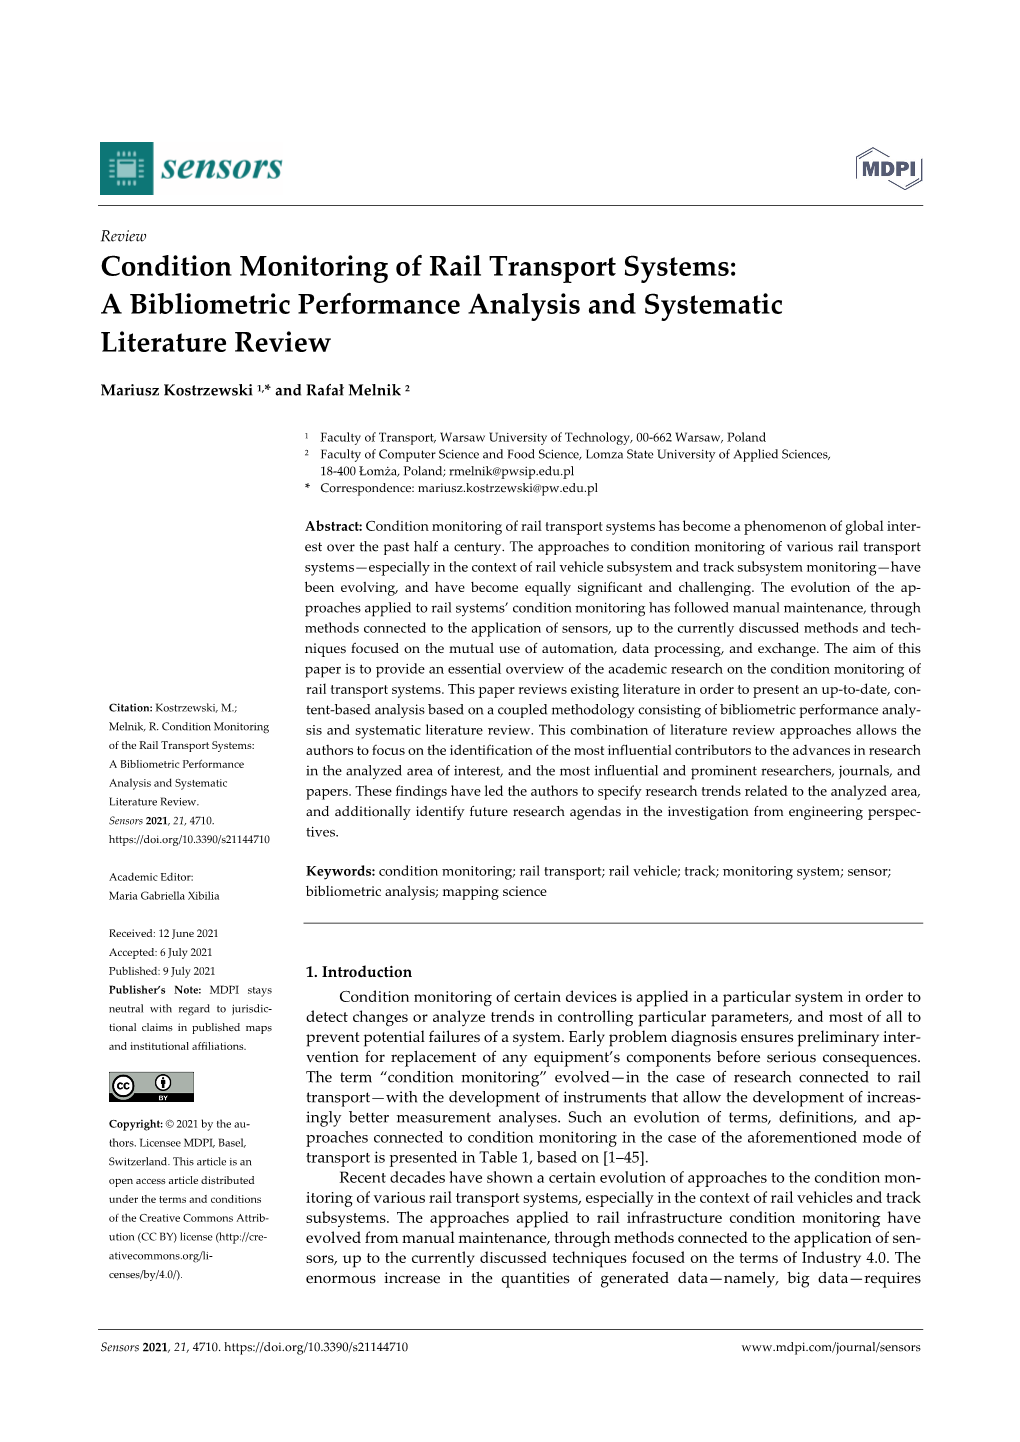 Condition Monitoring of Rail Transport Systems: a Bibliometric